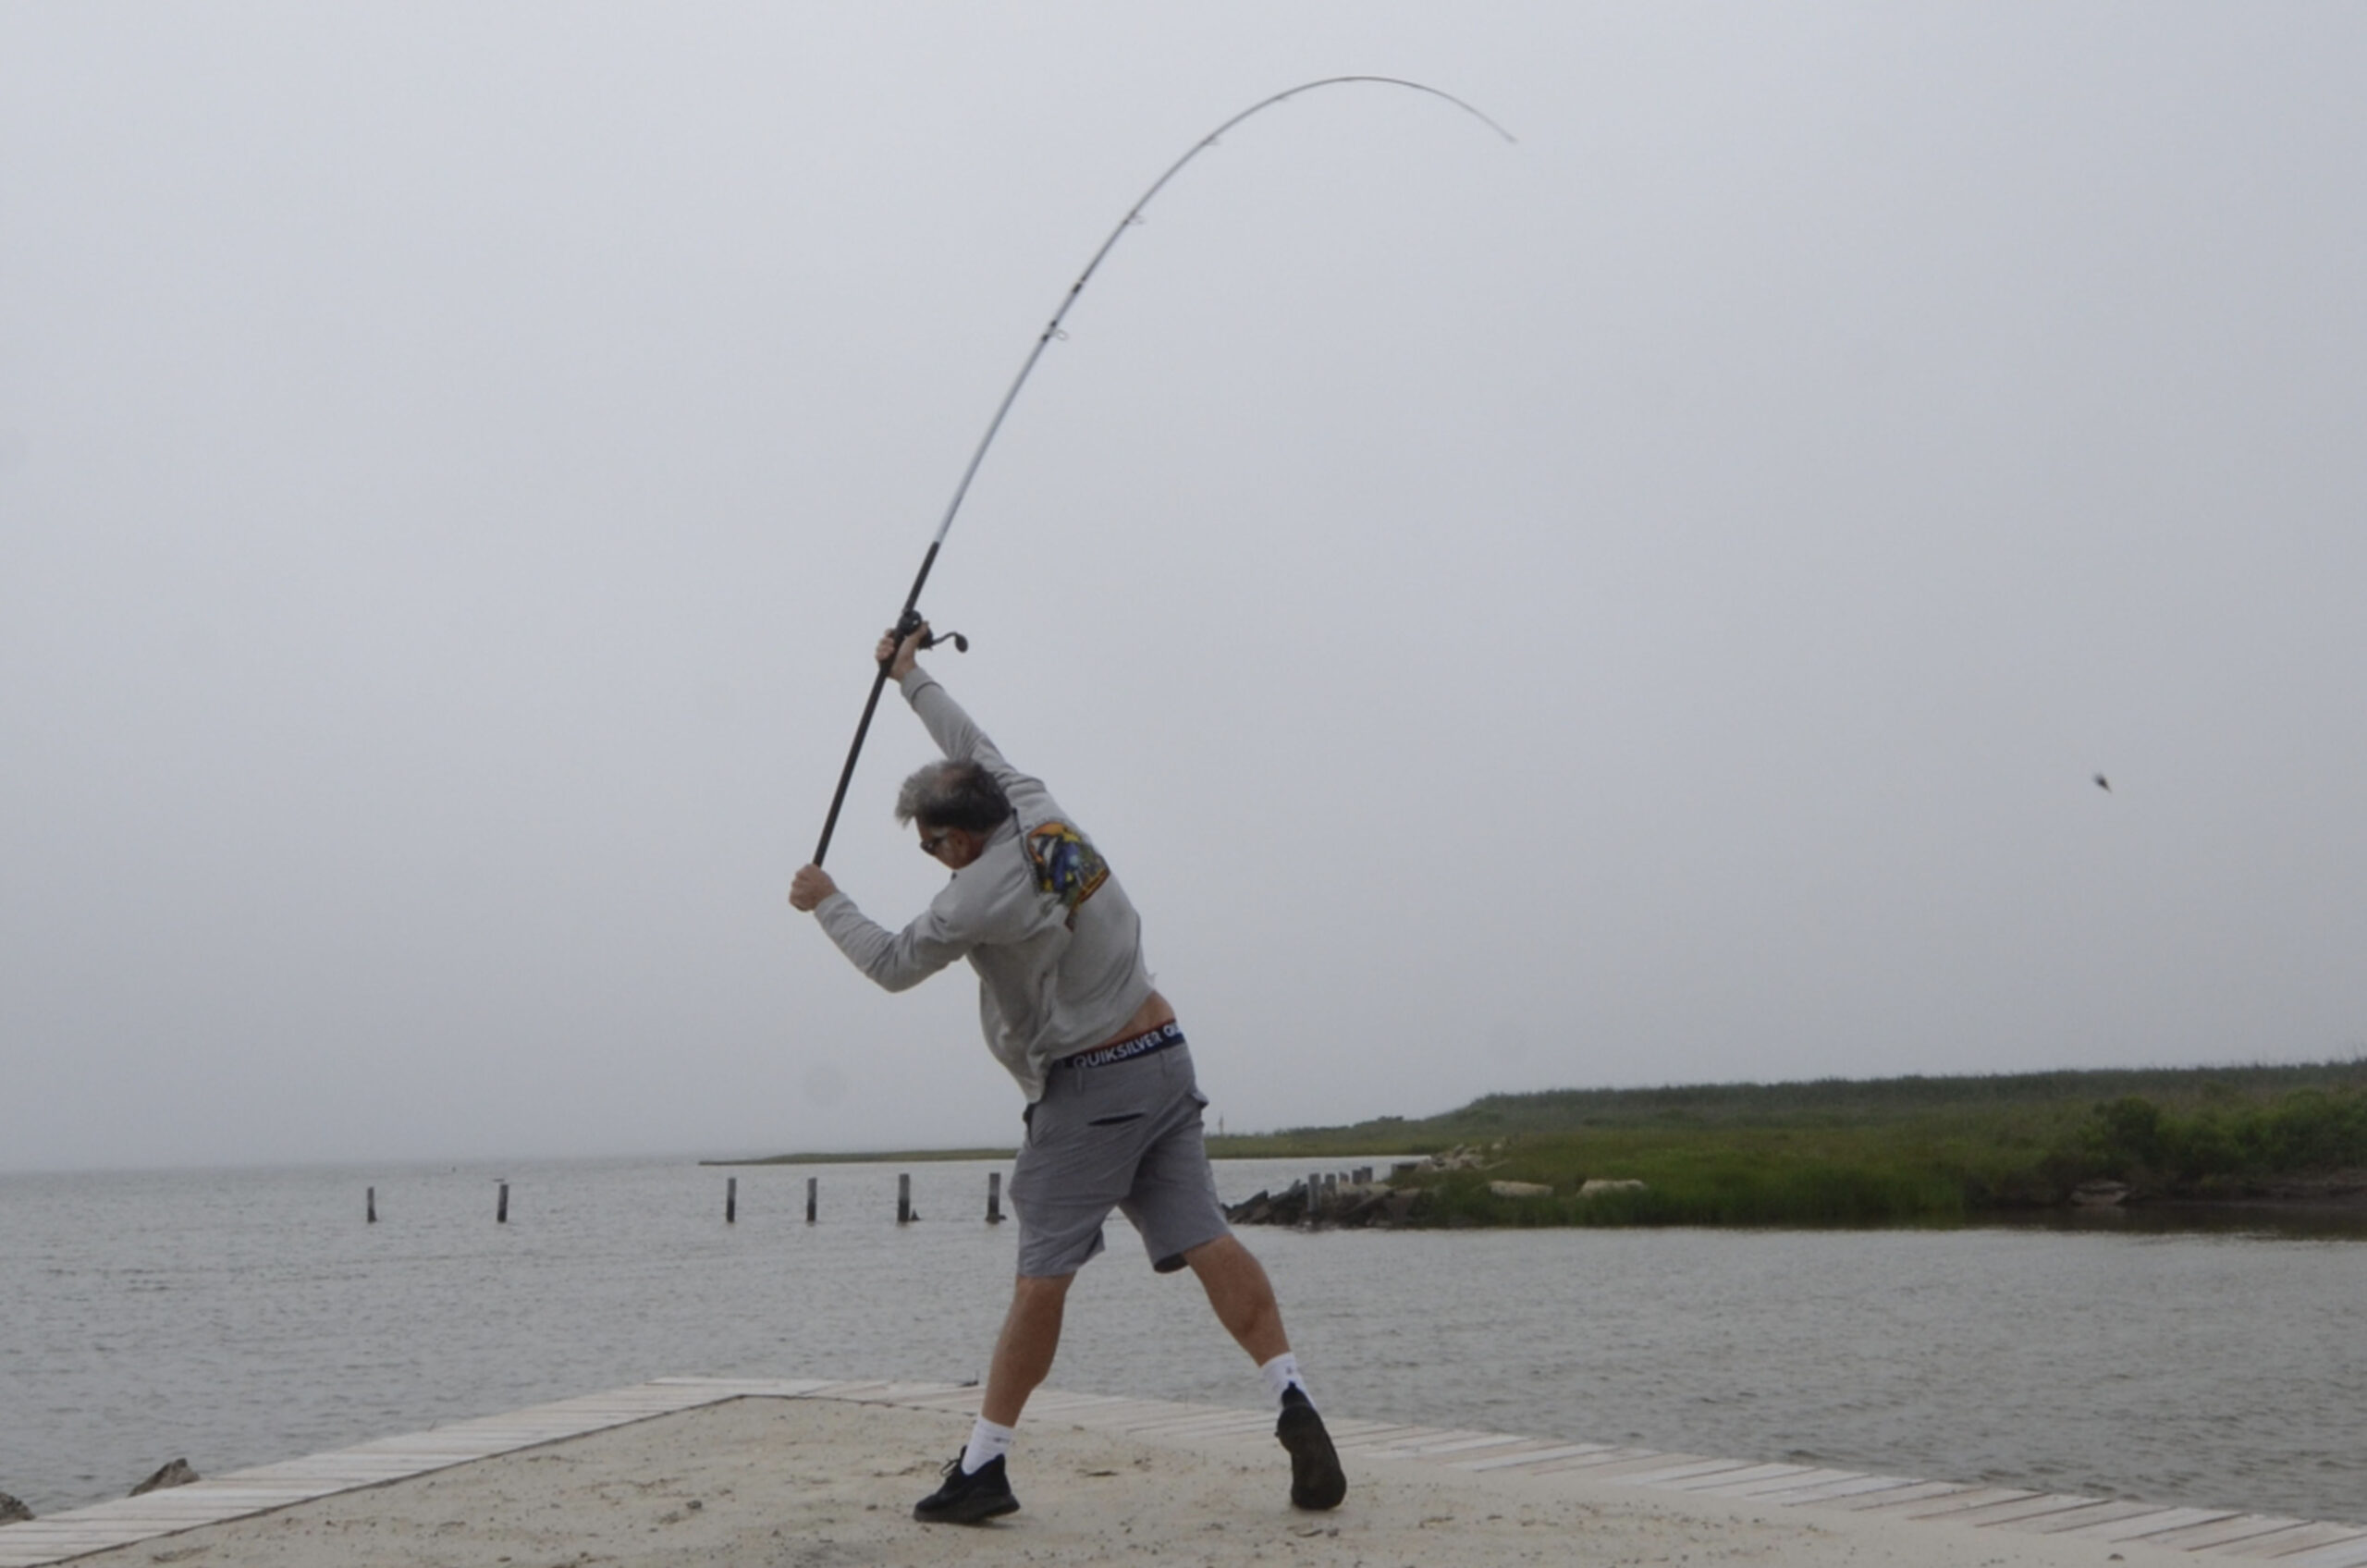 This heavy-action surf fishing rod earned the author his best casting distance.